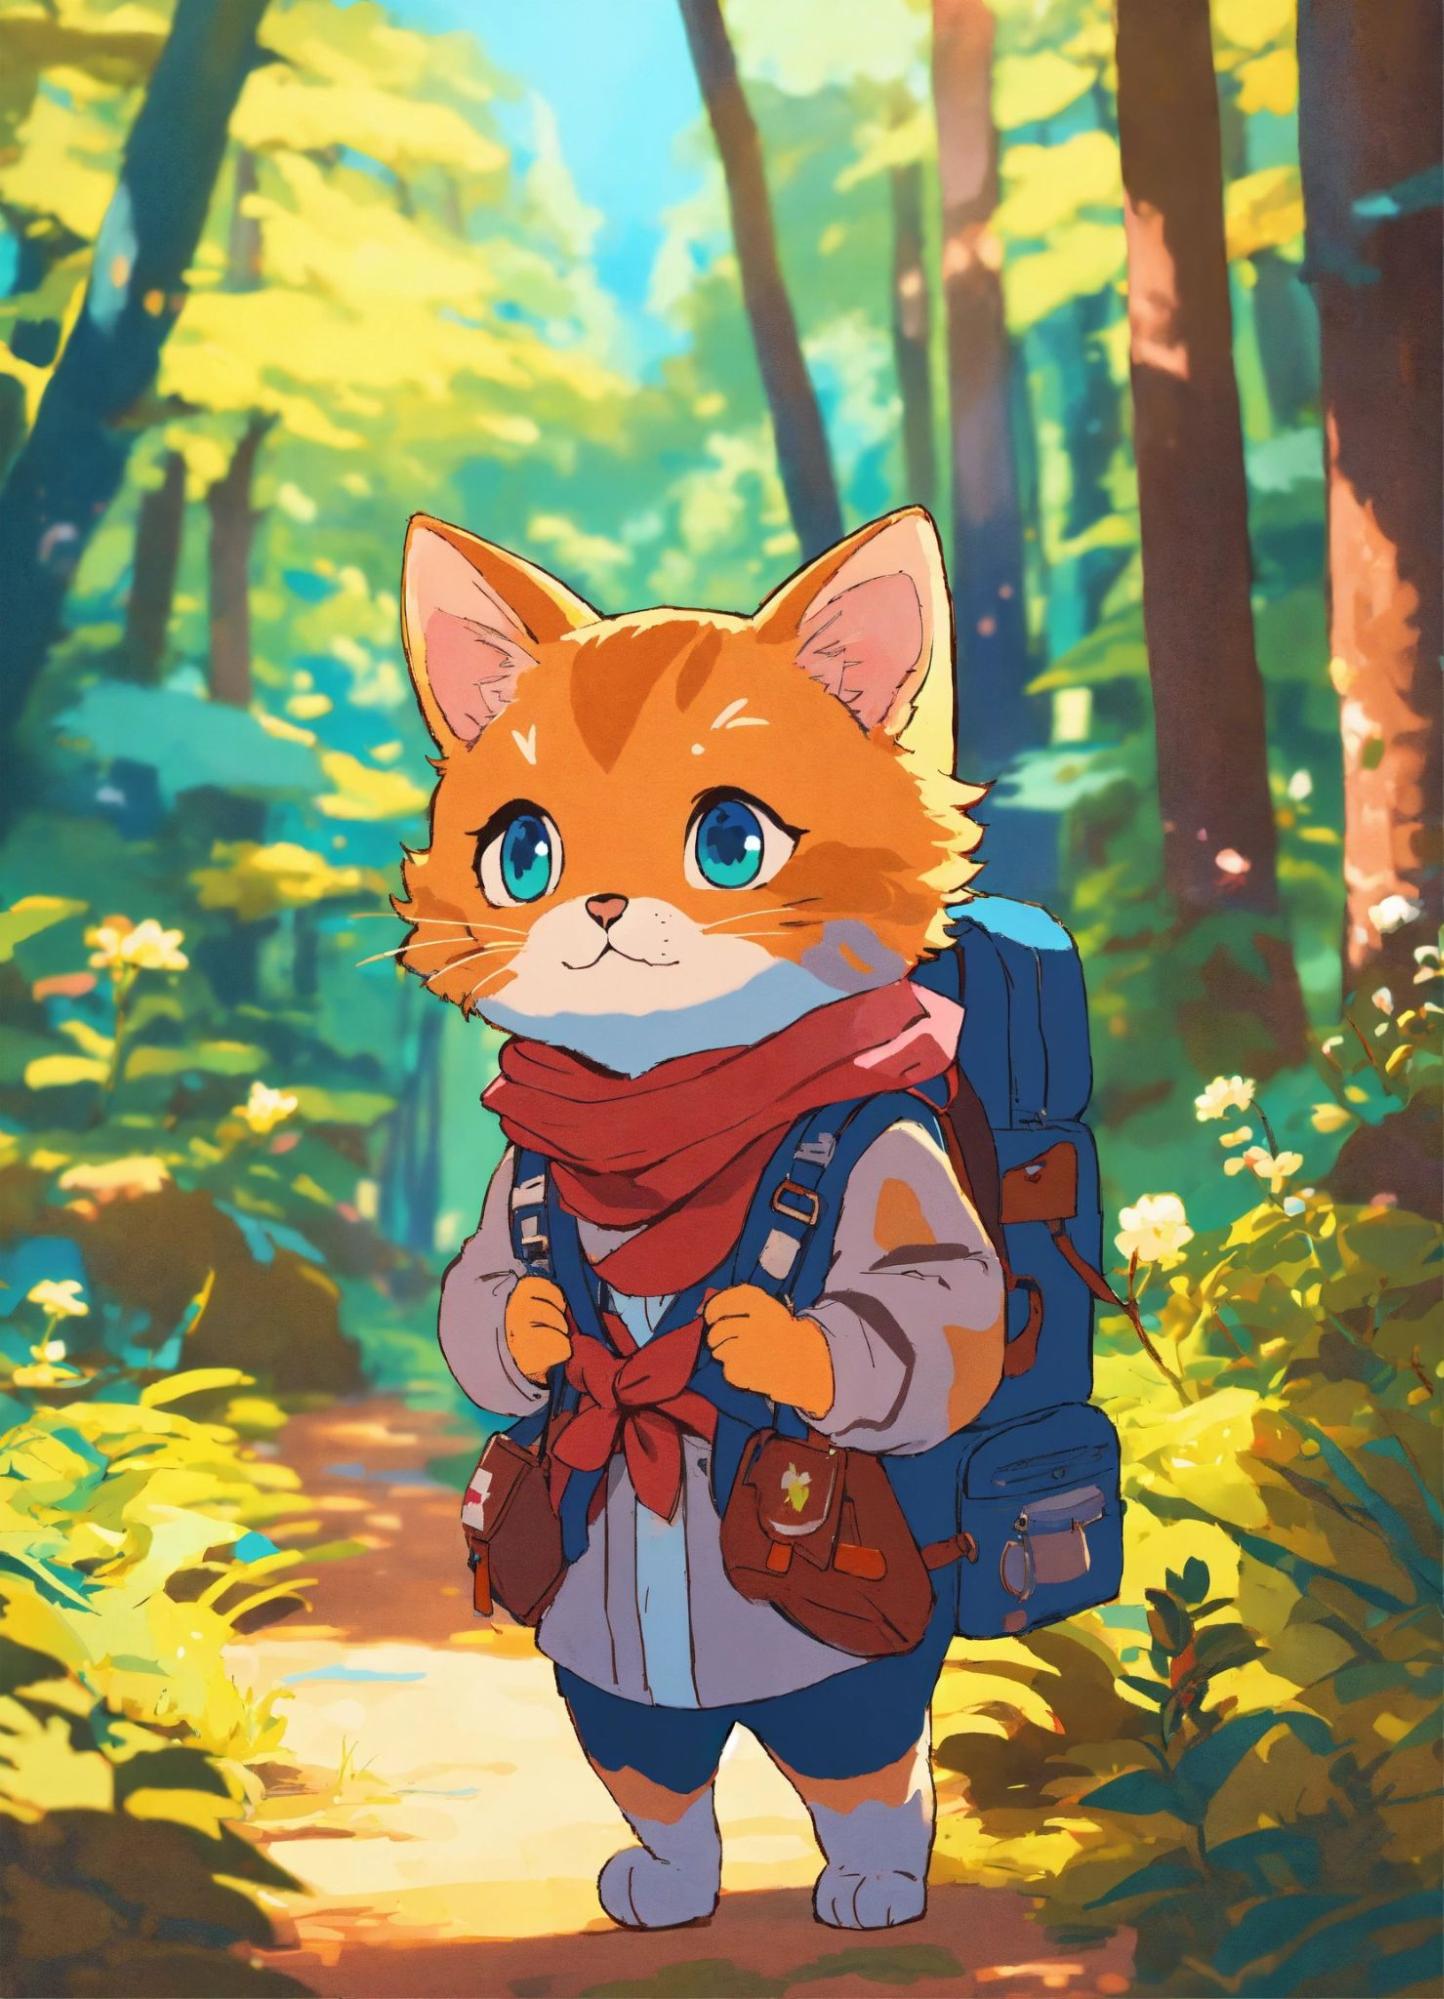 Little cat traveling in the forest